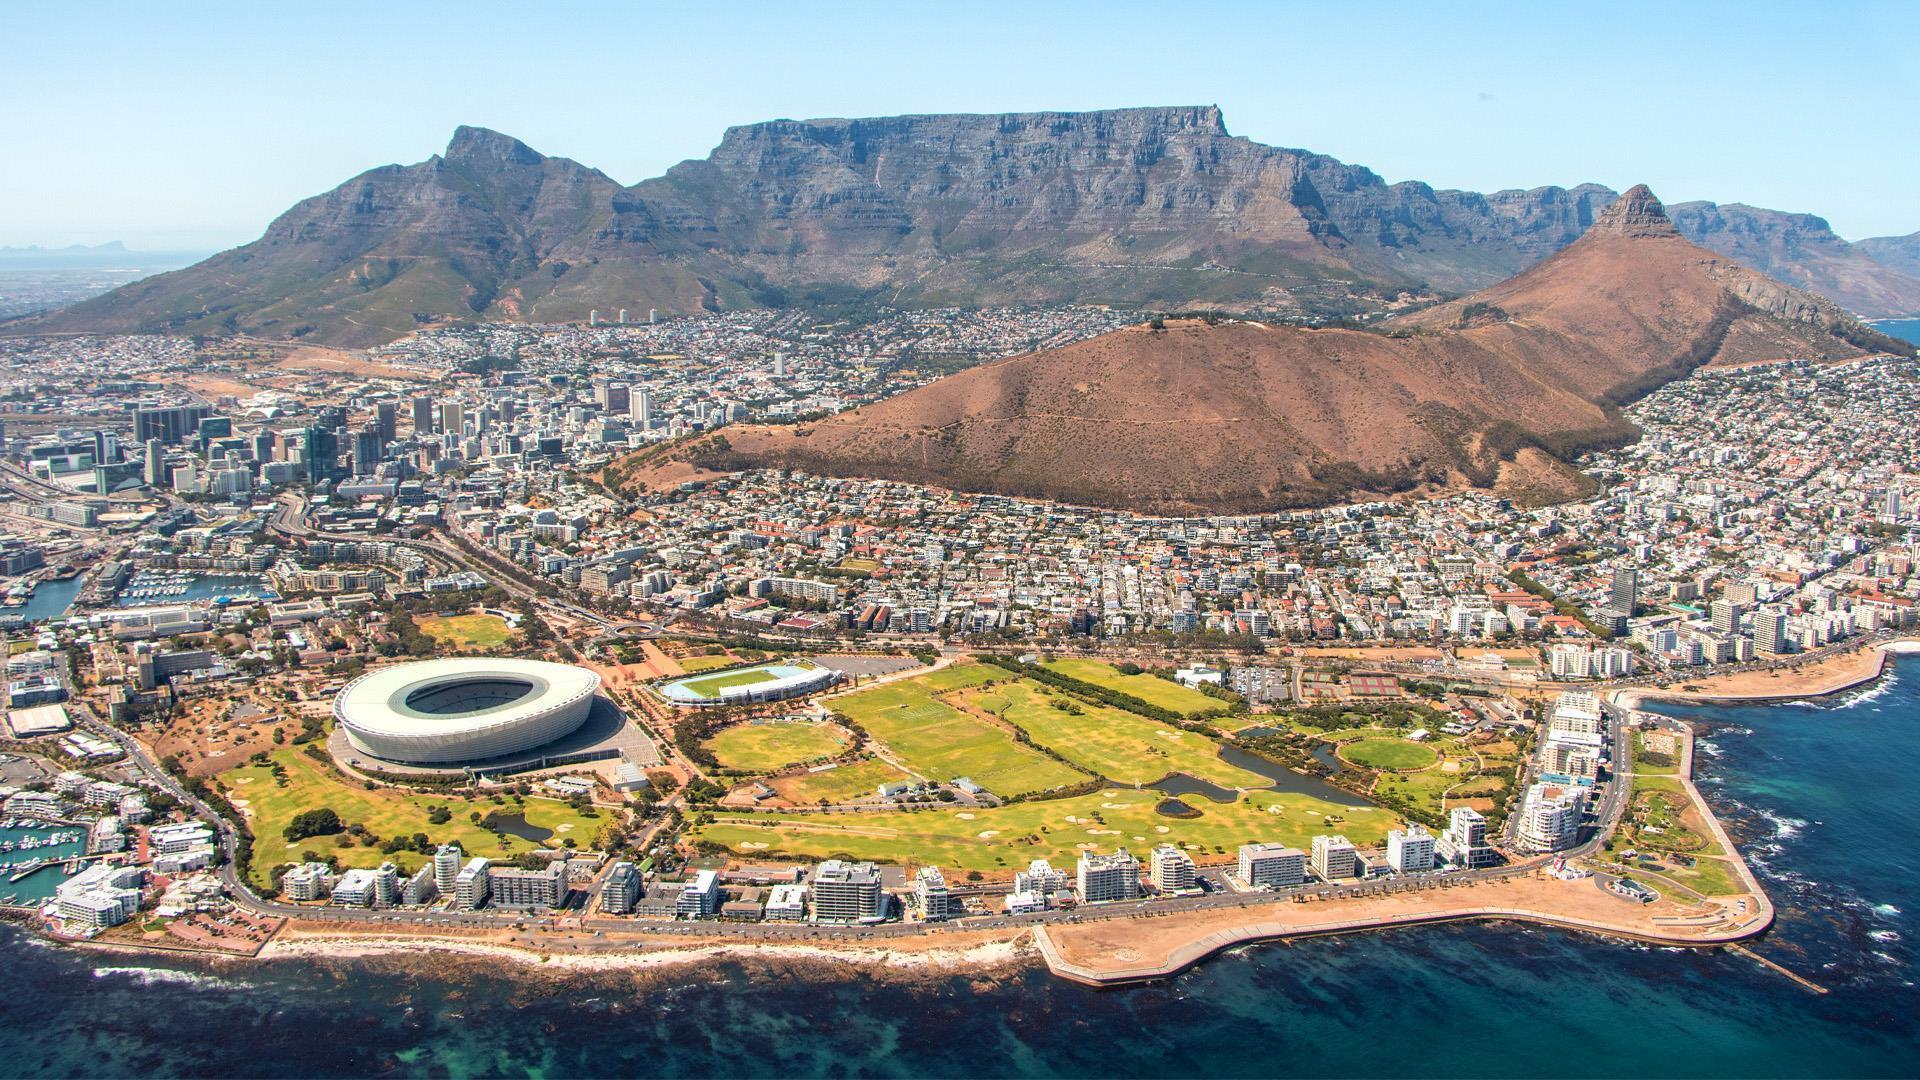 Escorted tour holidays in South Africa